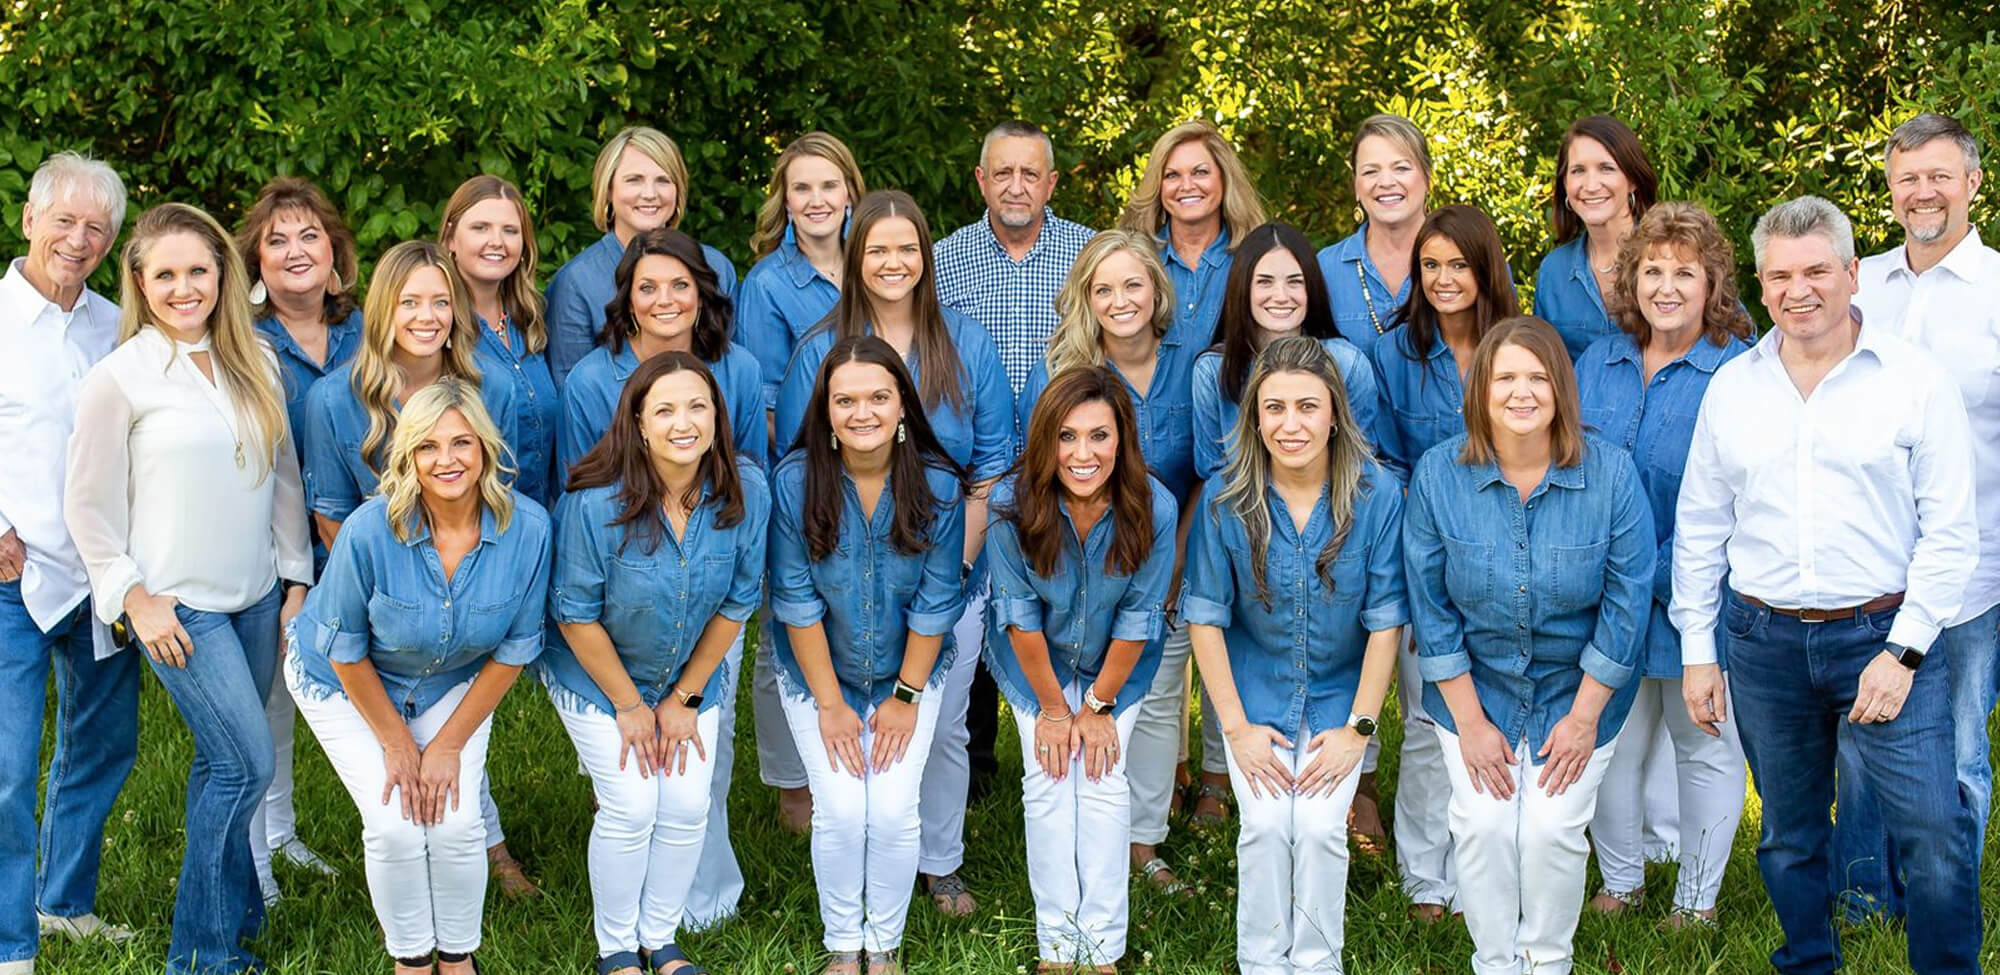 Our orthodontists near Spartanburg and orthodontic team